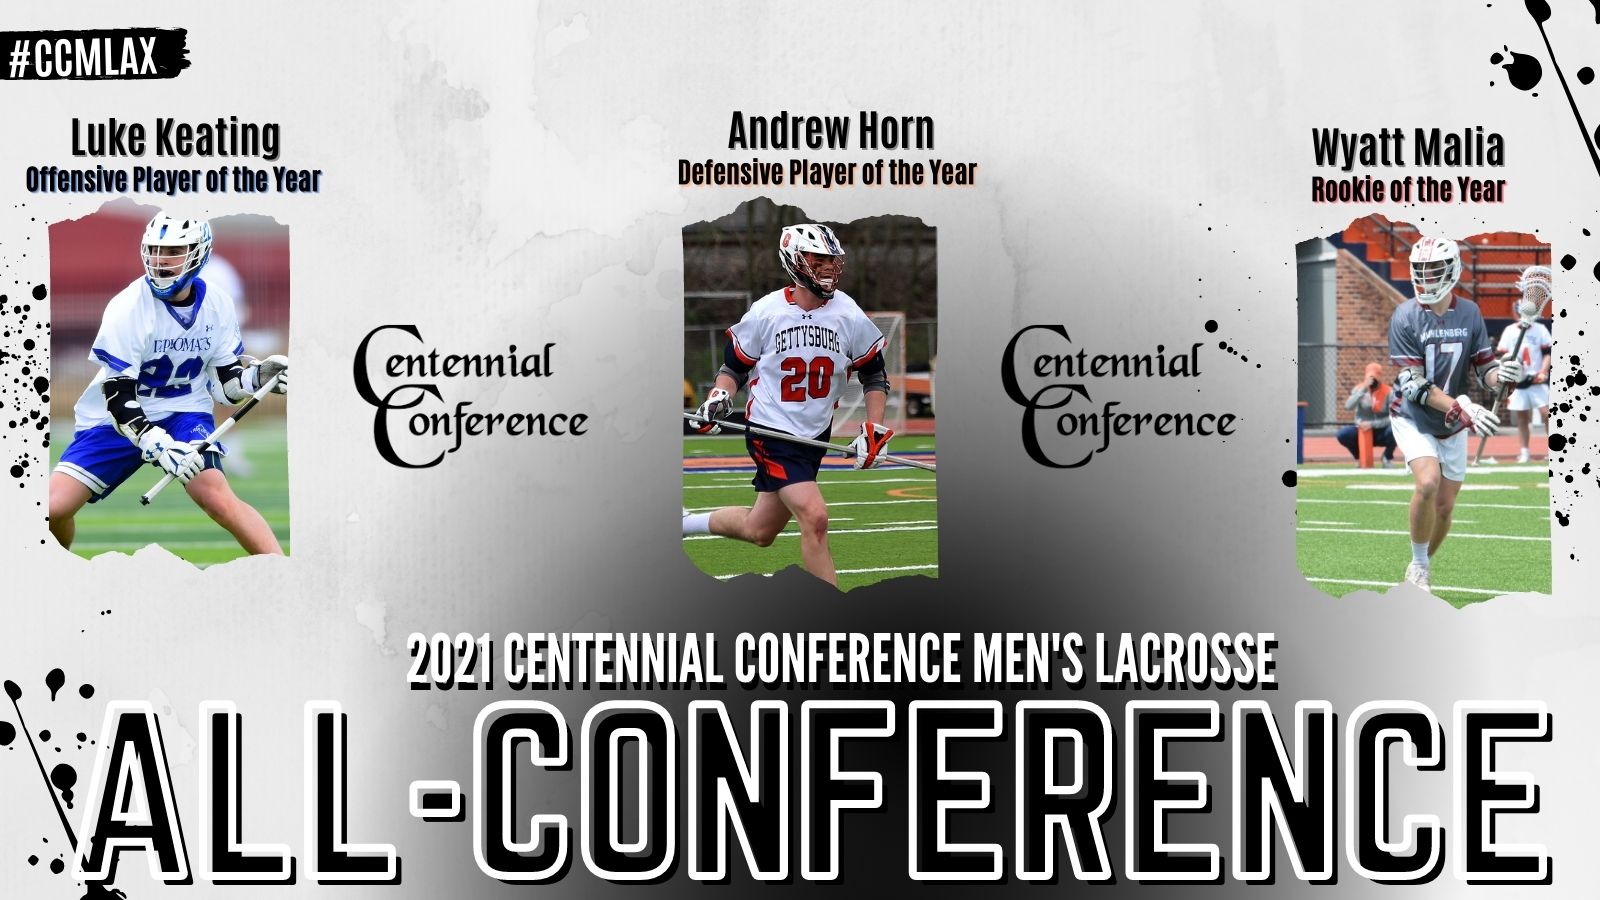 F&M's Keating Repeats as Offensive Player of the Year, Gettysburg's Horn Earns Top Defensive Honor on All-Centennial Men's Lacrosse Team